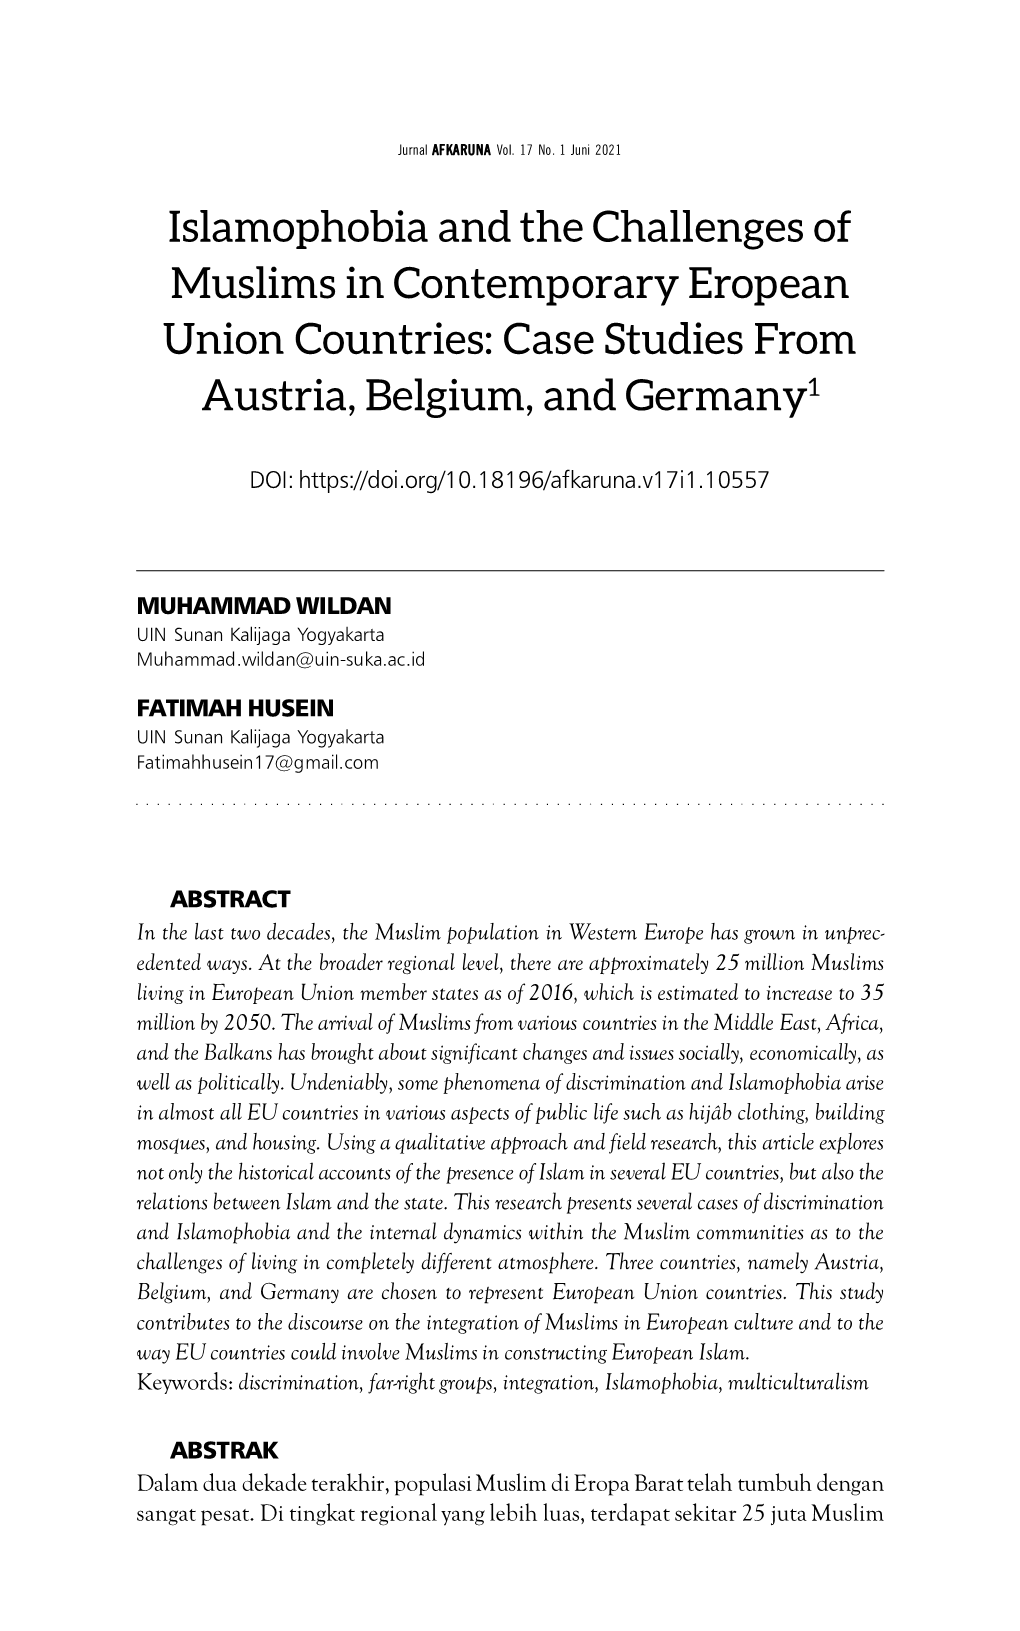 Islamophobia and the Challenges of Muslims in Contemporary Eropean Union Countries: Case Studies from Austria, Belgium, and Germany1